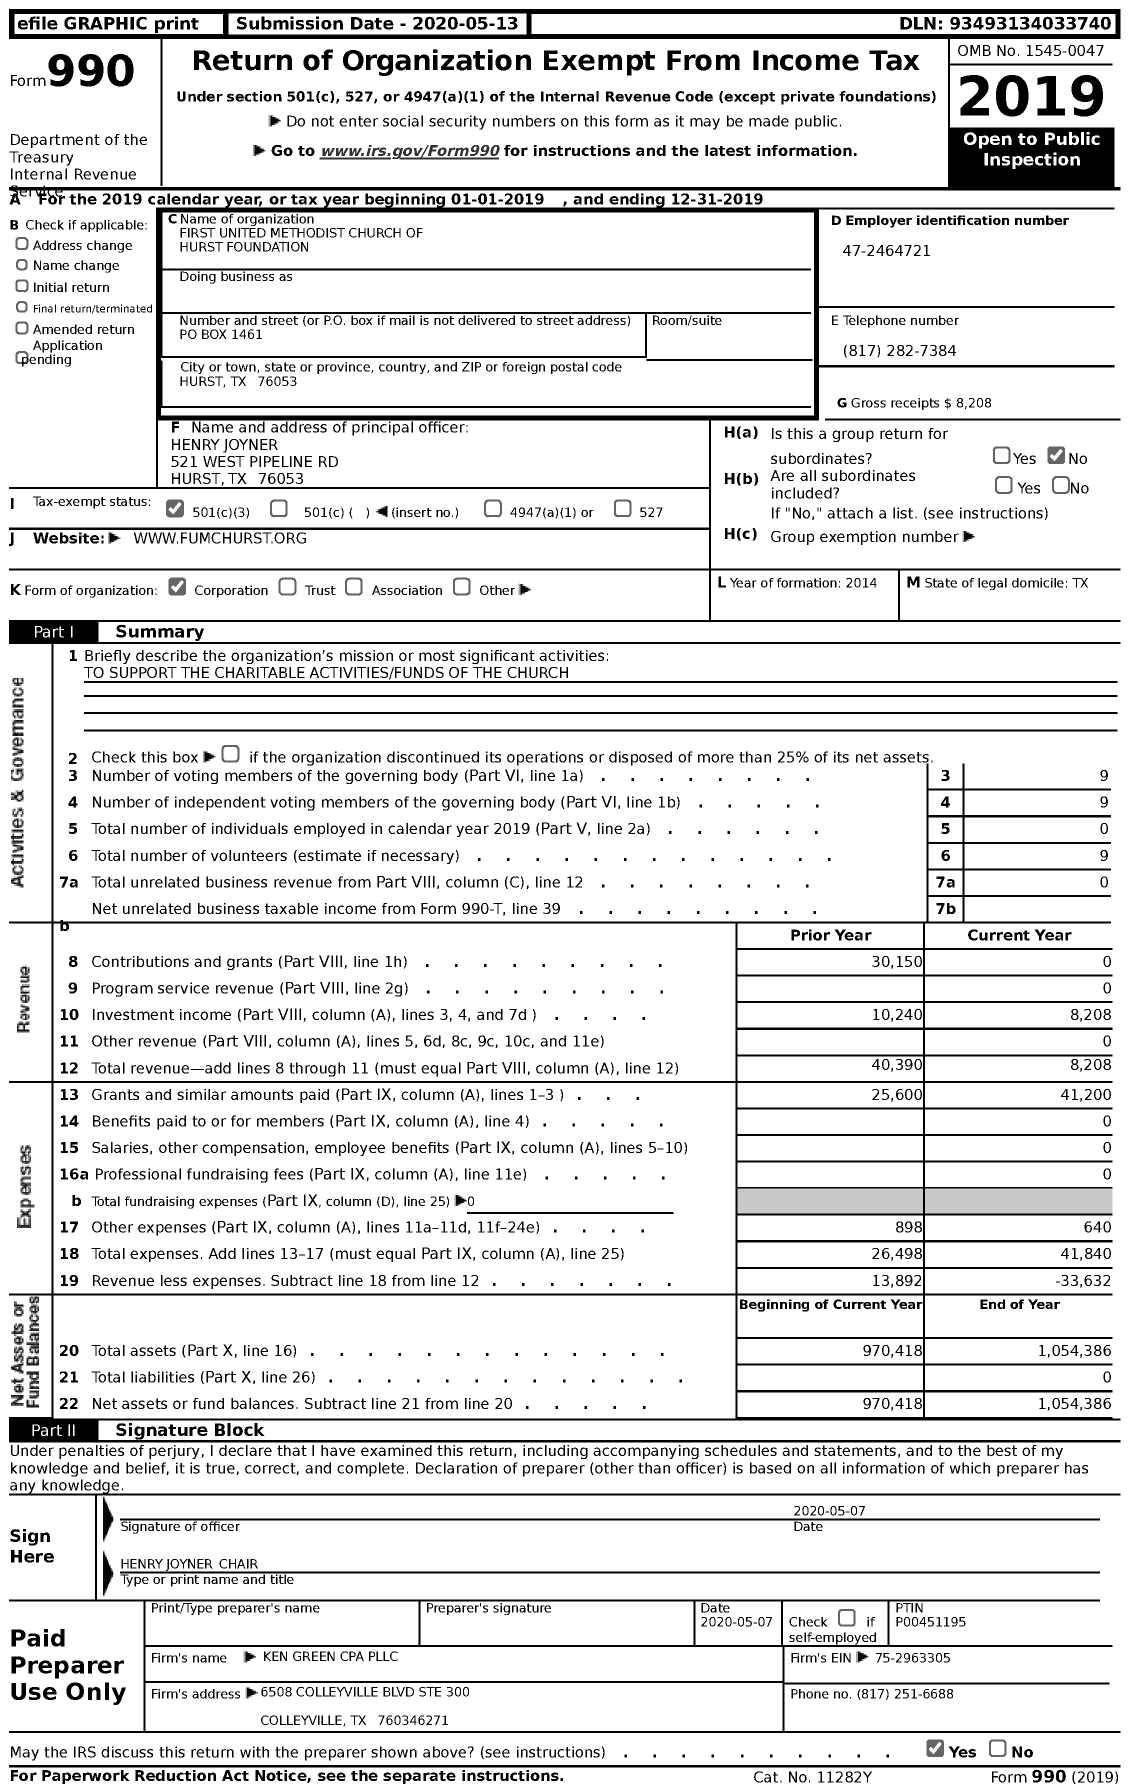 Image of first page of 2019 Form 990 for First United Methodist Church of Hurst Foundation